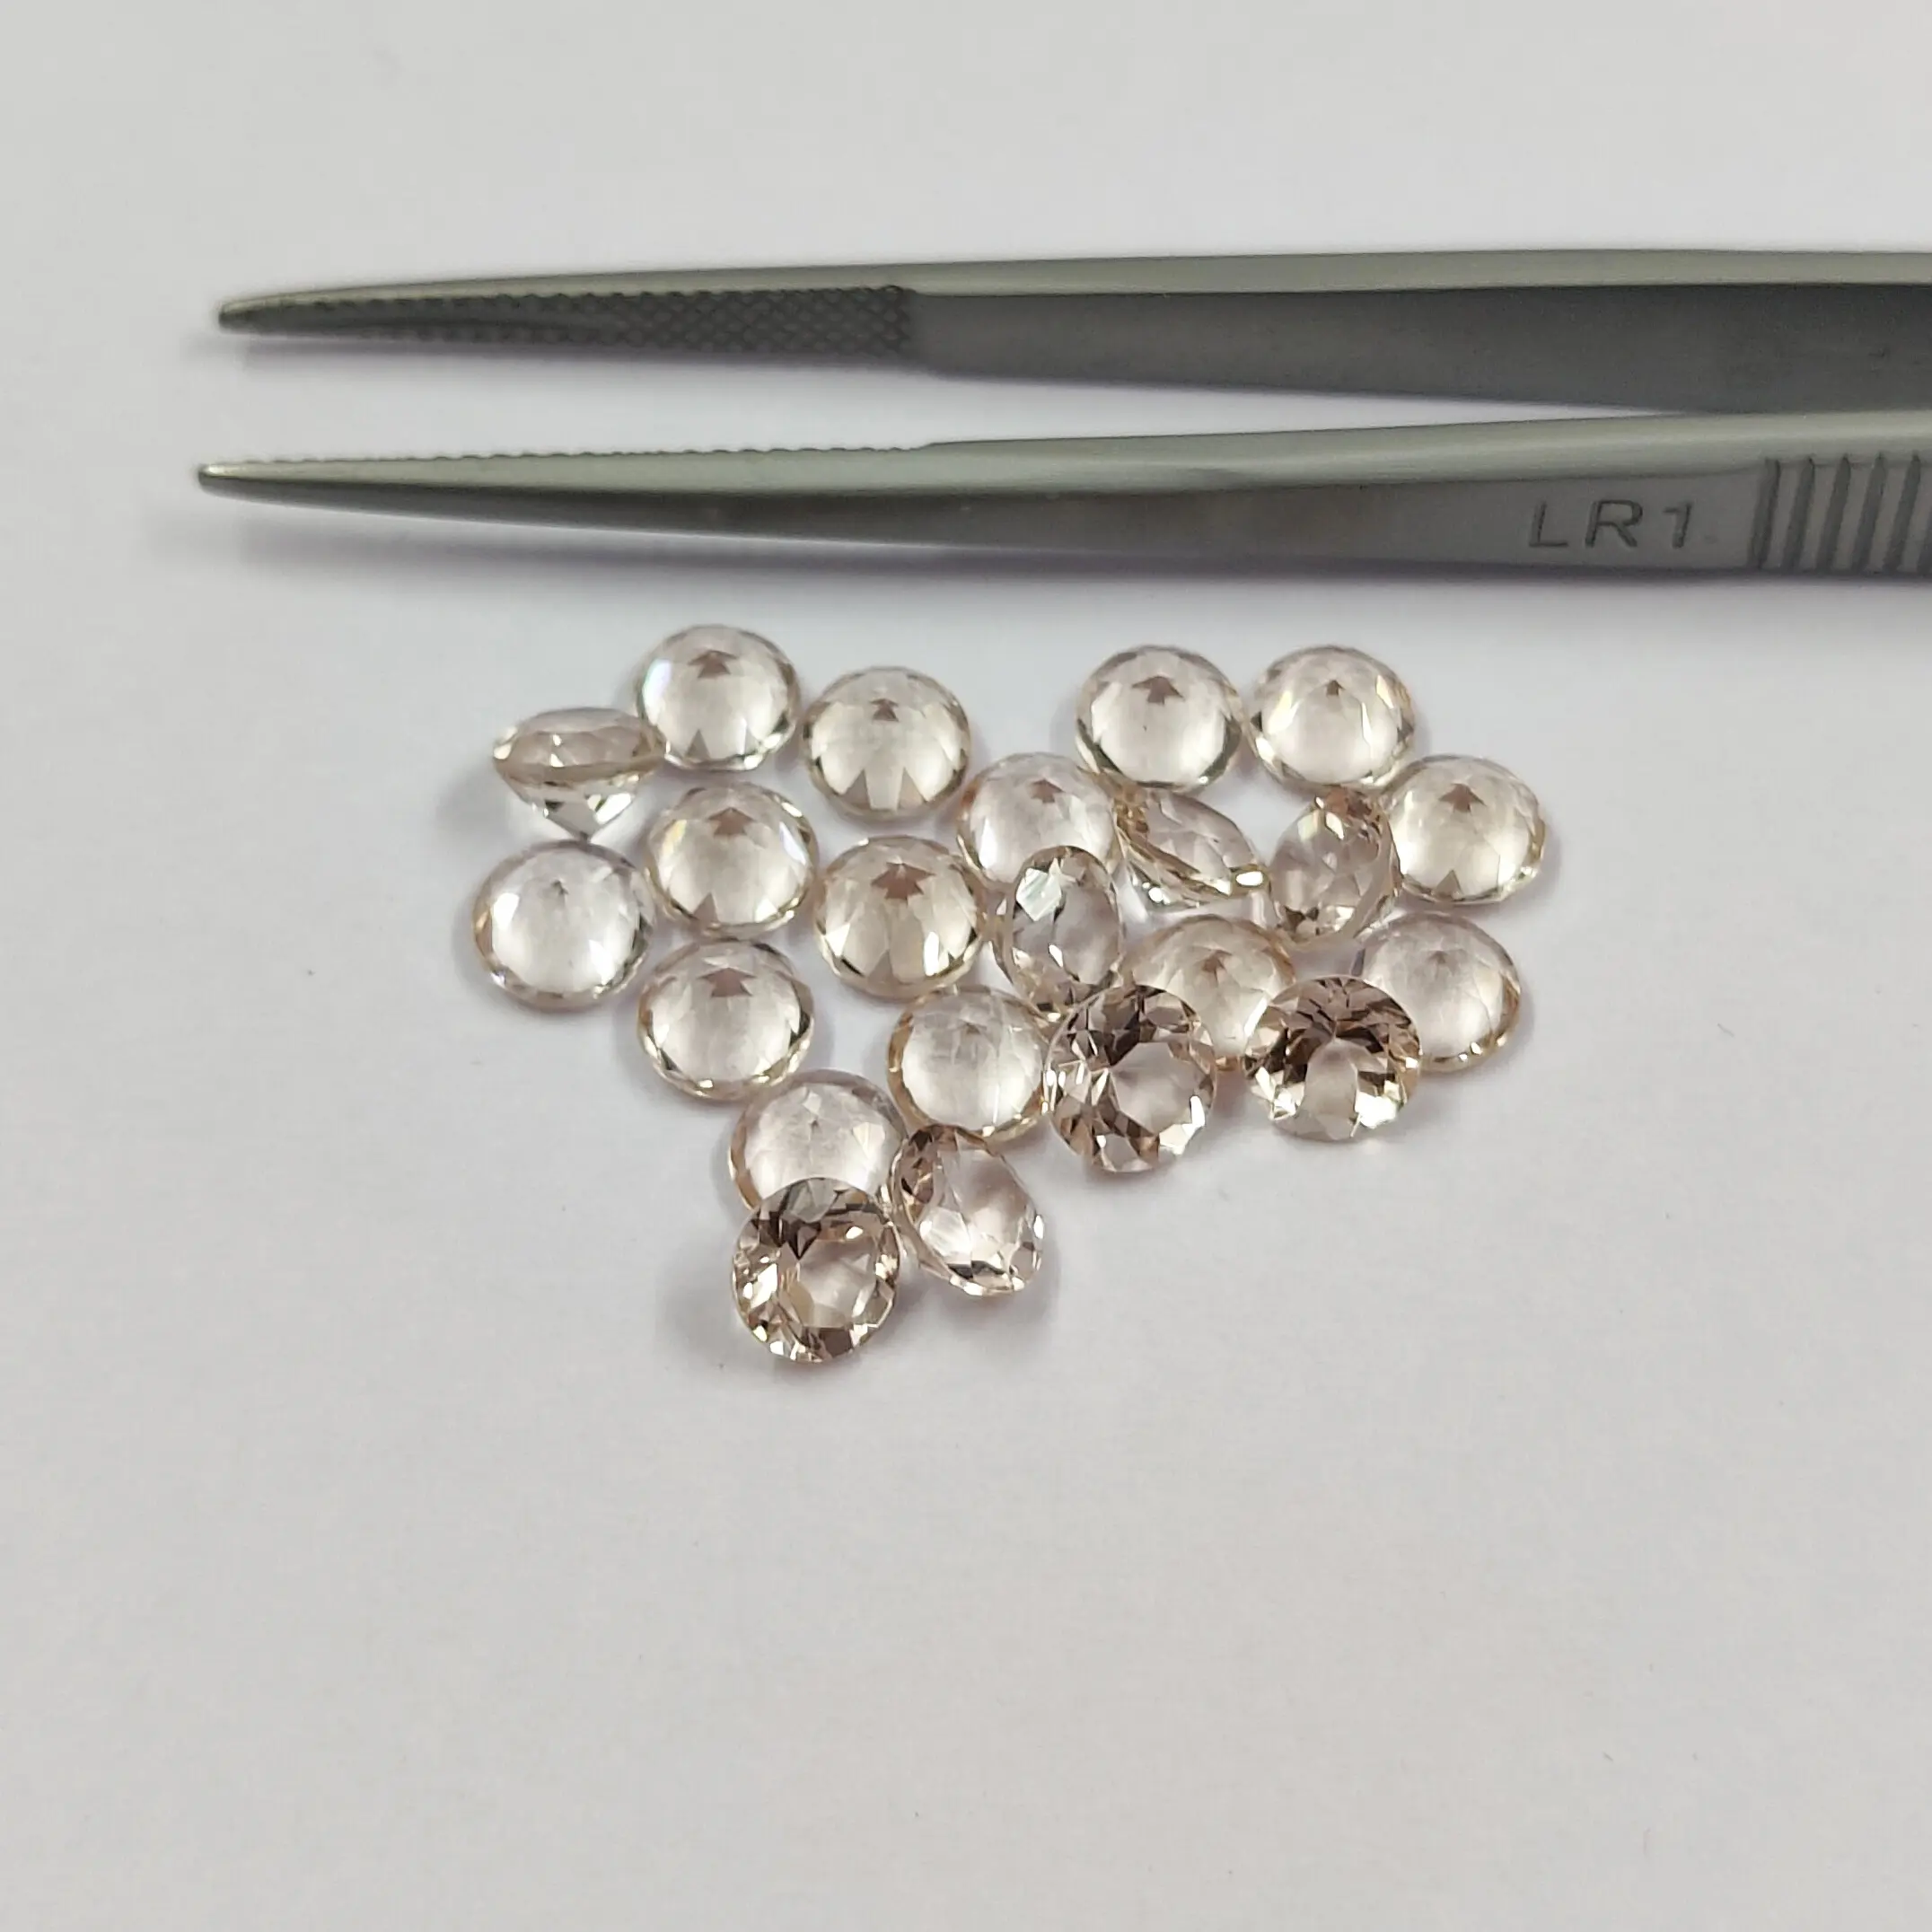 Hot Selling Top Quality 8mm Morganite Faceted Round Cut Natural Loose Gemstones With IGI Certificate From Supplier